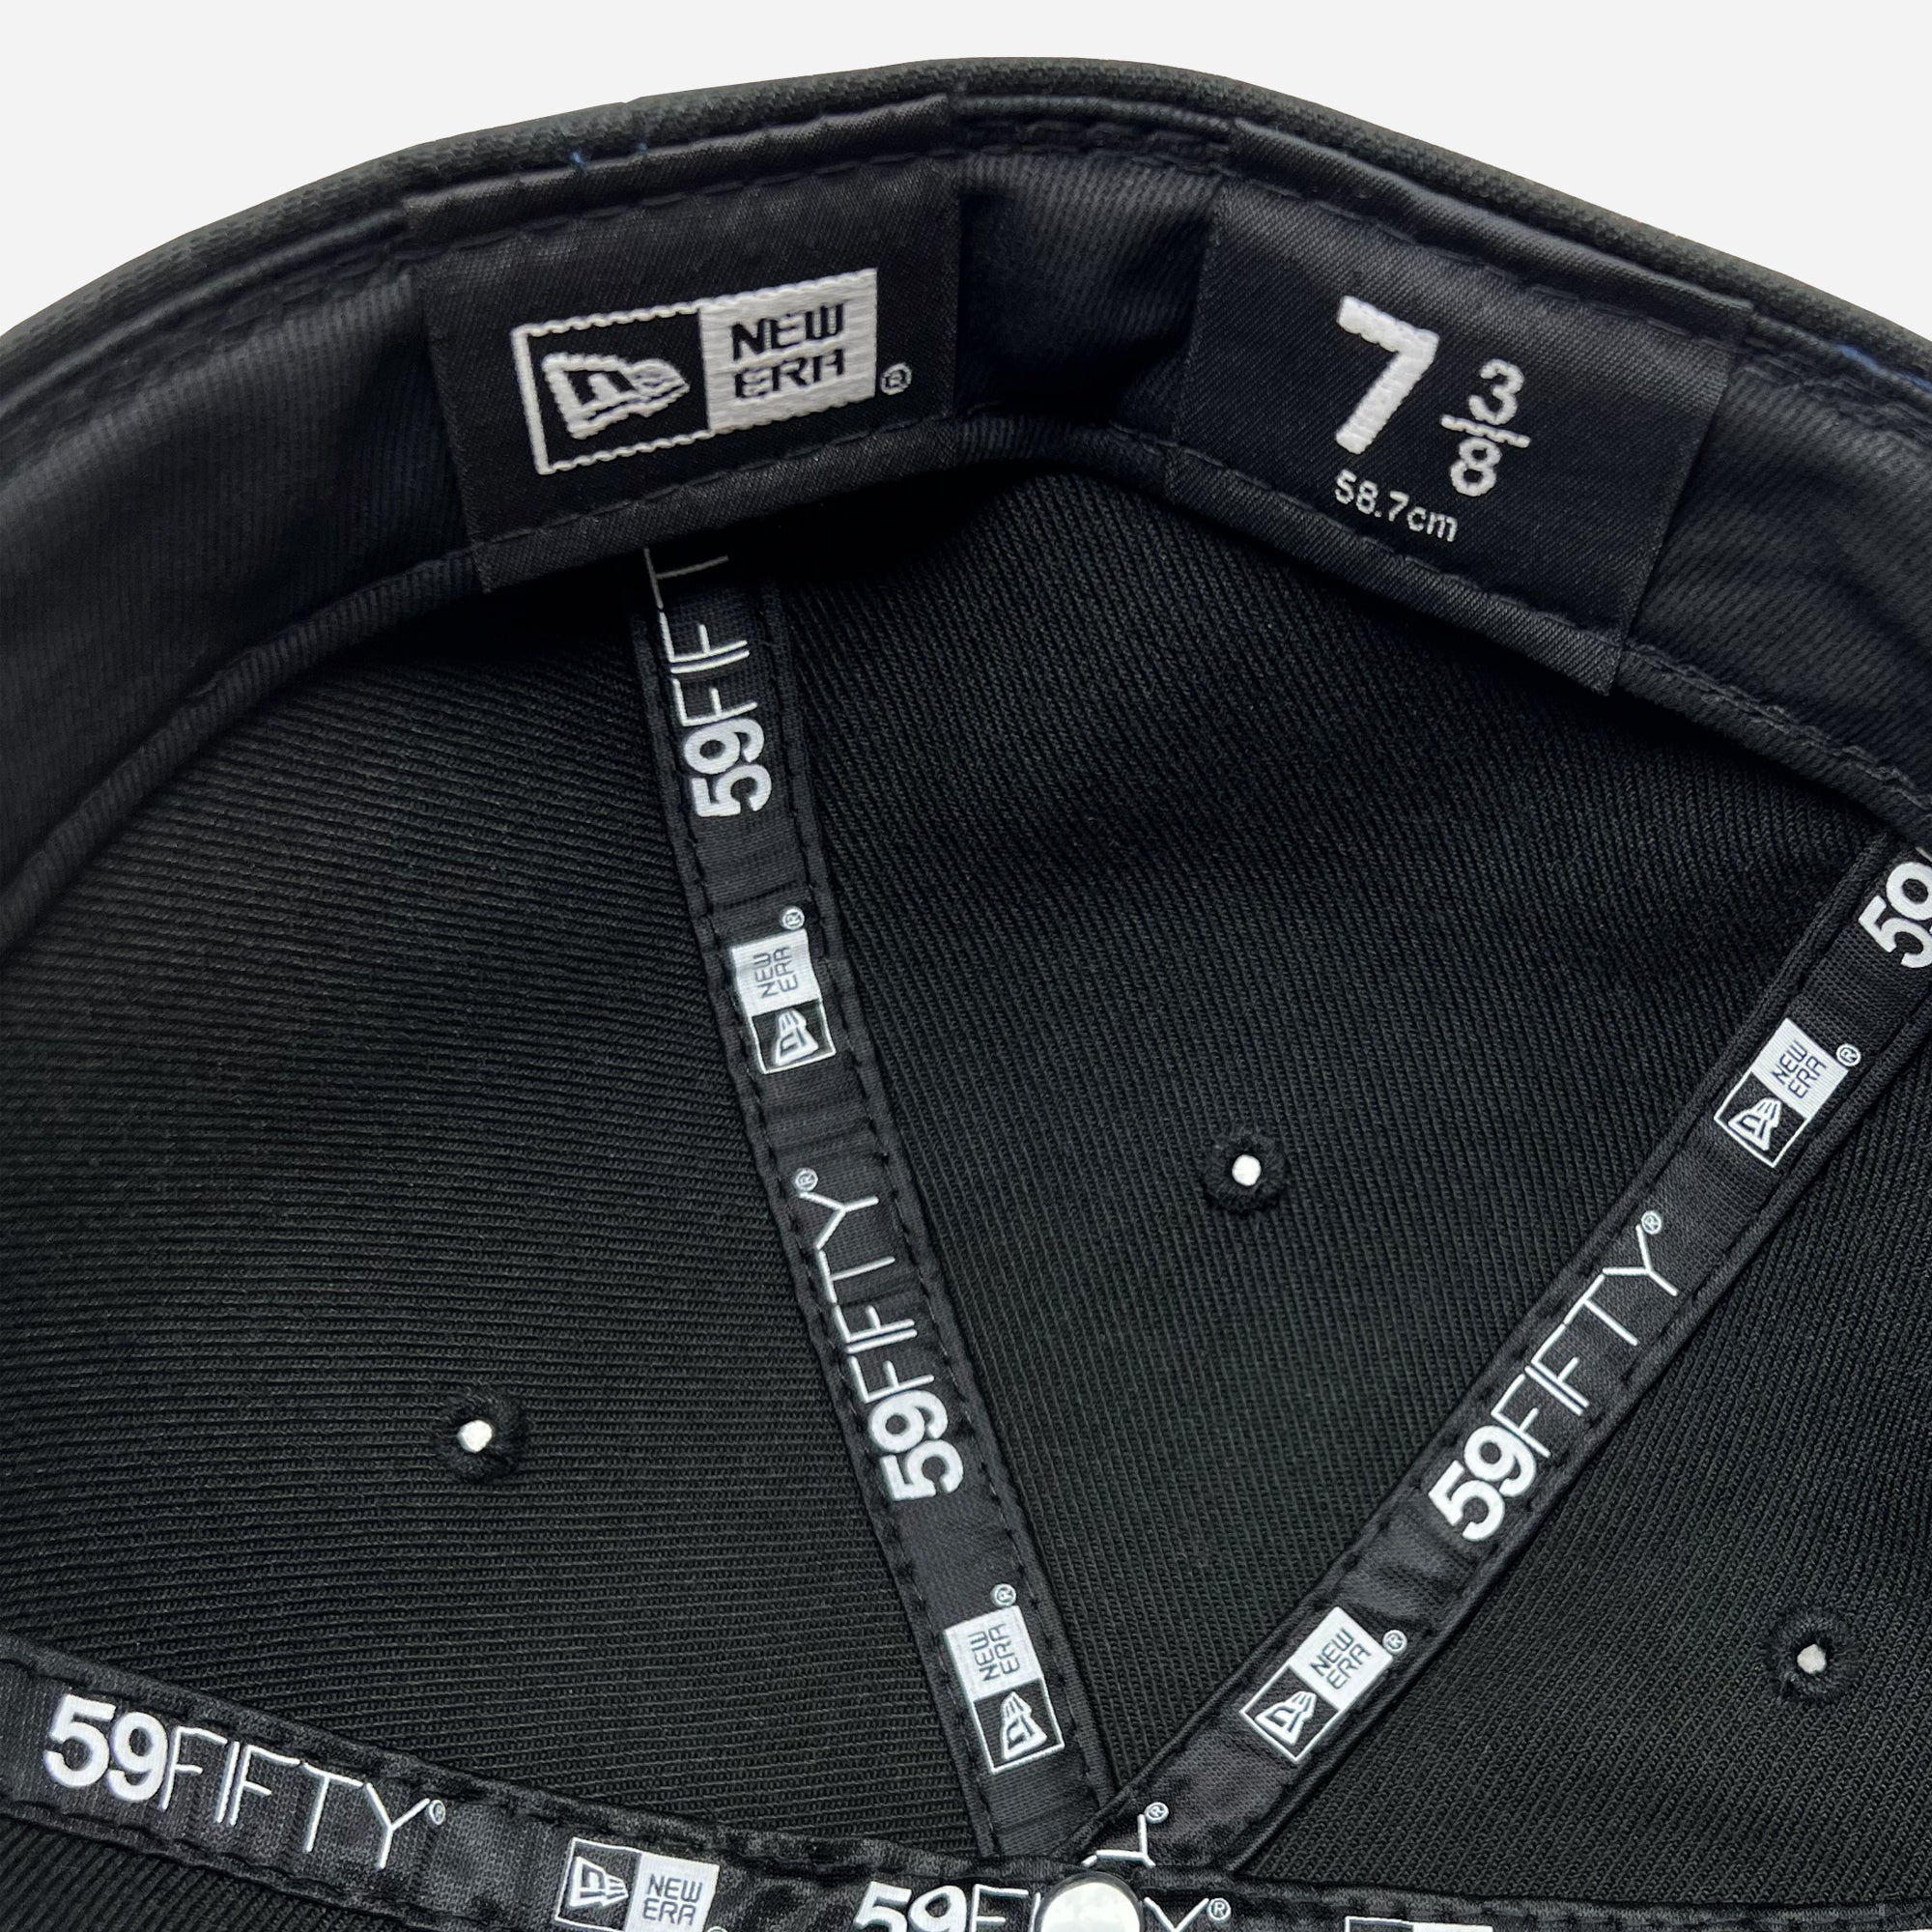 View of inside the crown of New Era 9FIFTY fitted black cap with black New Era striping.